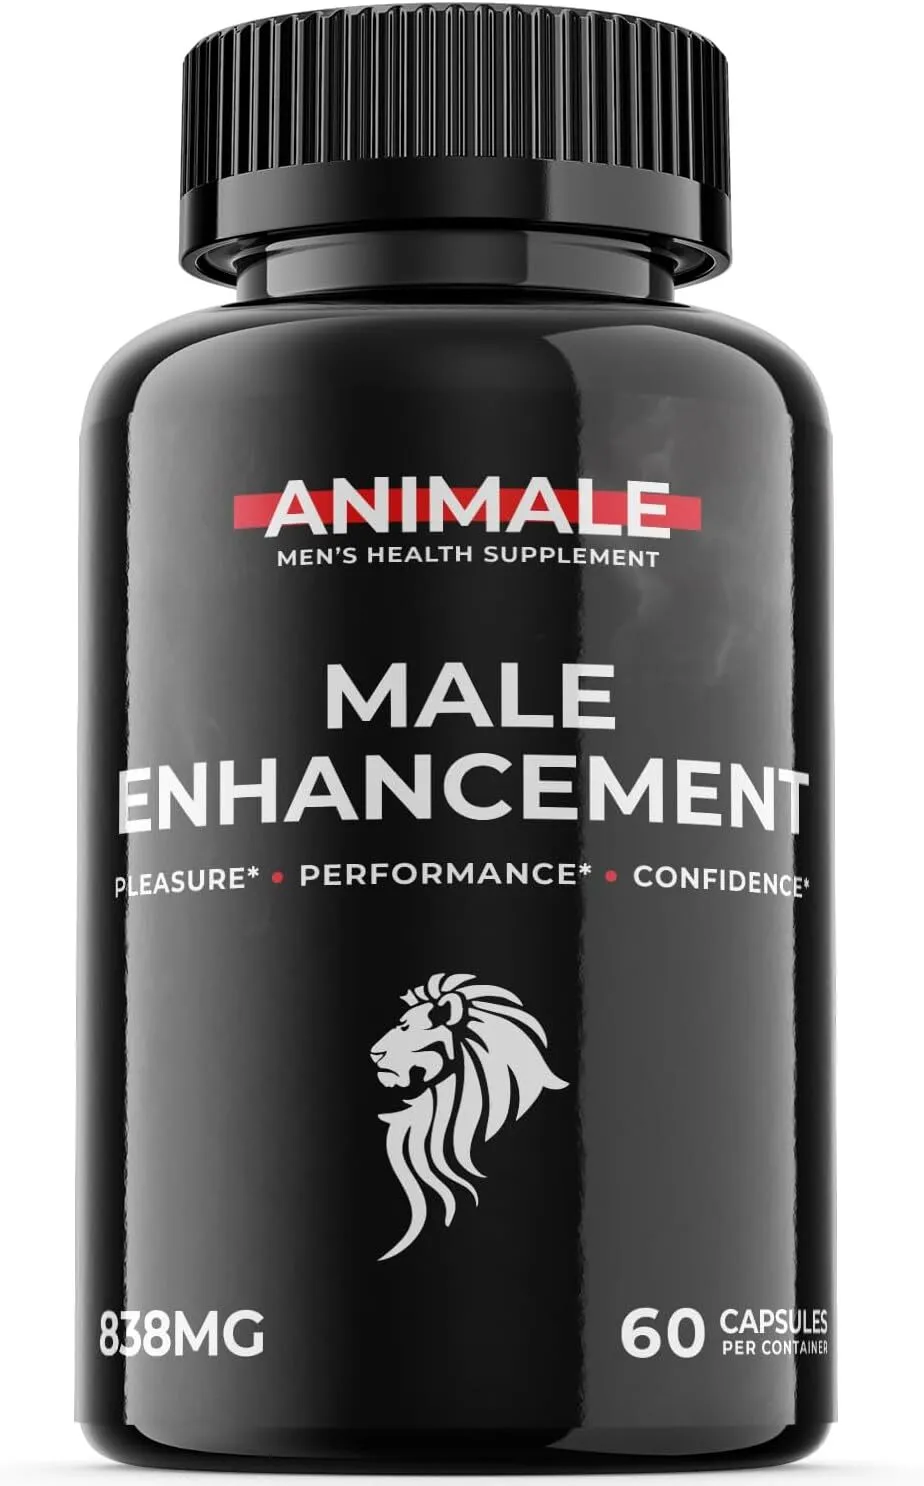 Animale Pills - Animale Male Support Supplement - 60 Capsules - $68.99